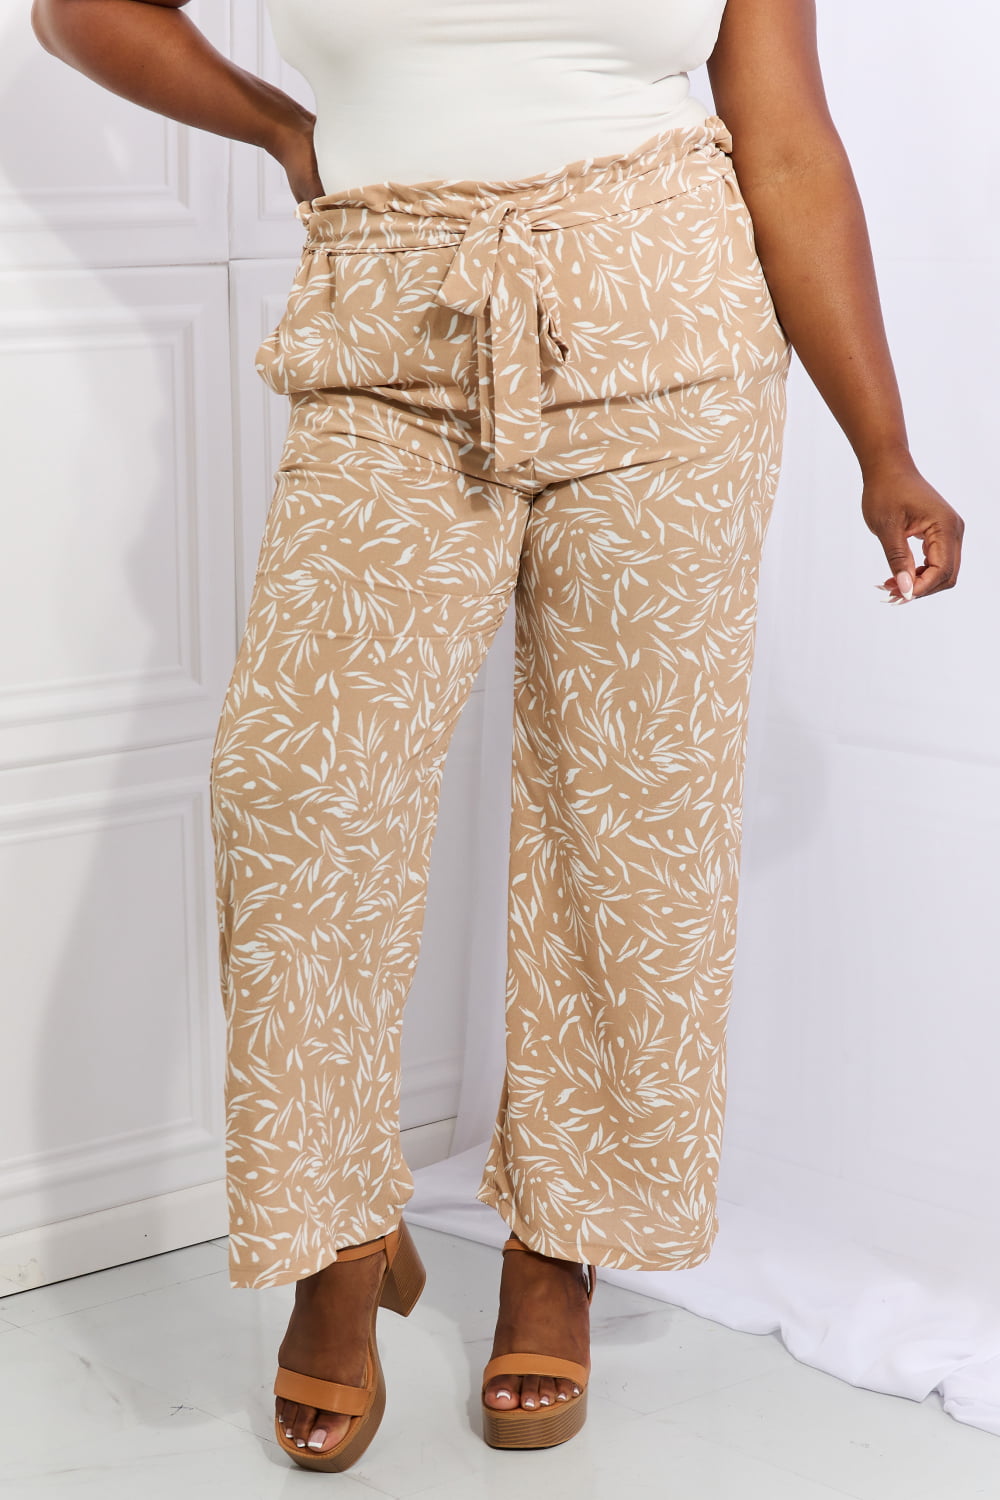 Geometric Printed Pants in Tan - AnnRose Boutique